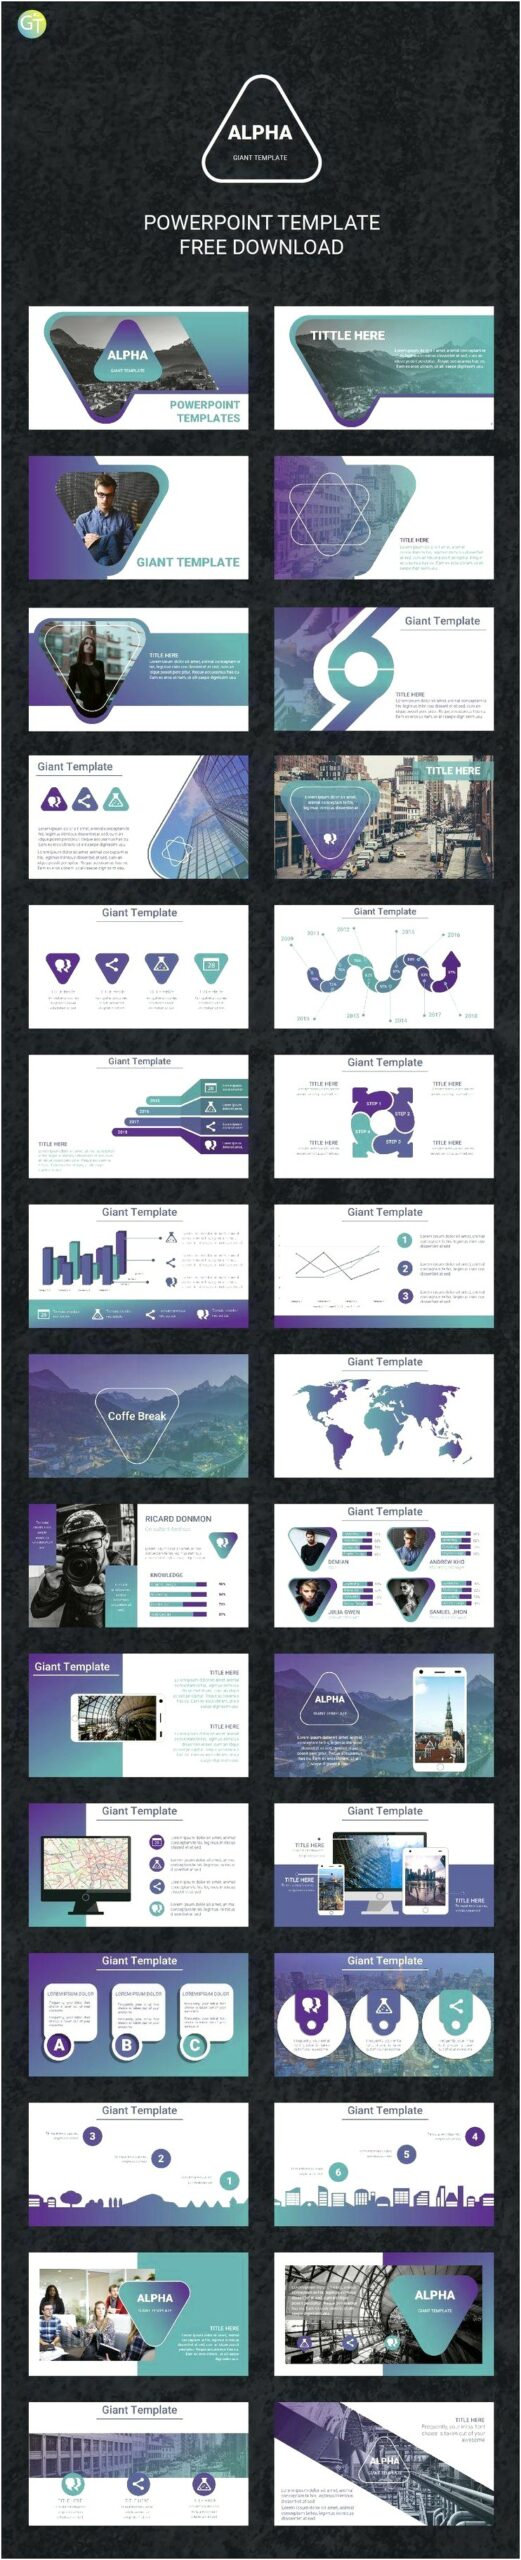 Animated Powerpoint Templates Free Download 2012